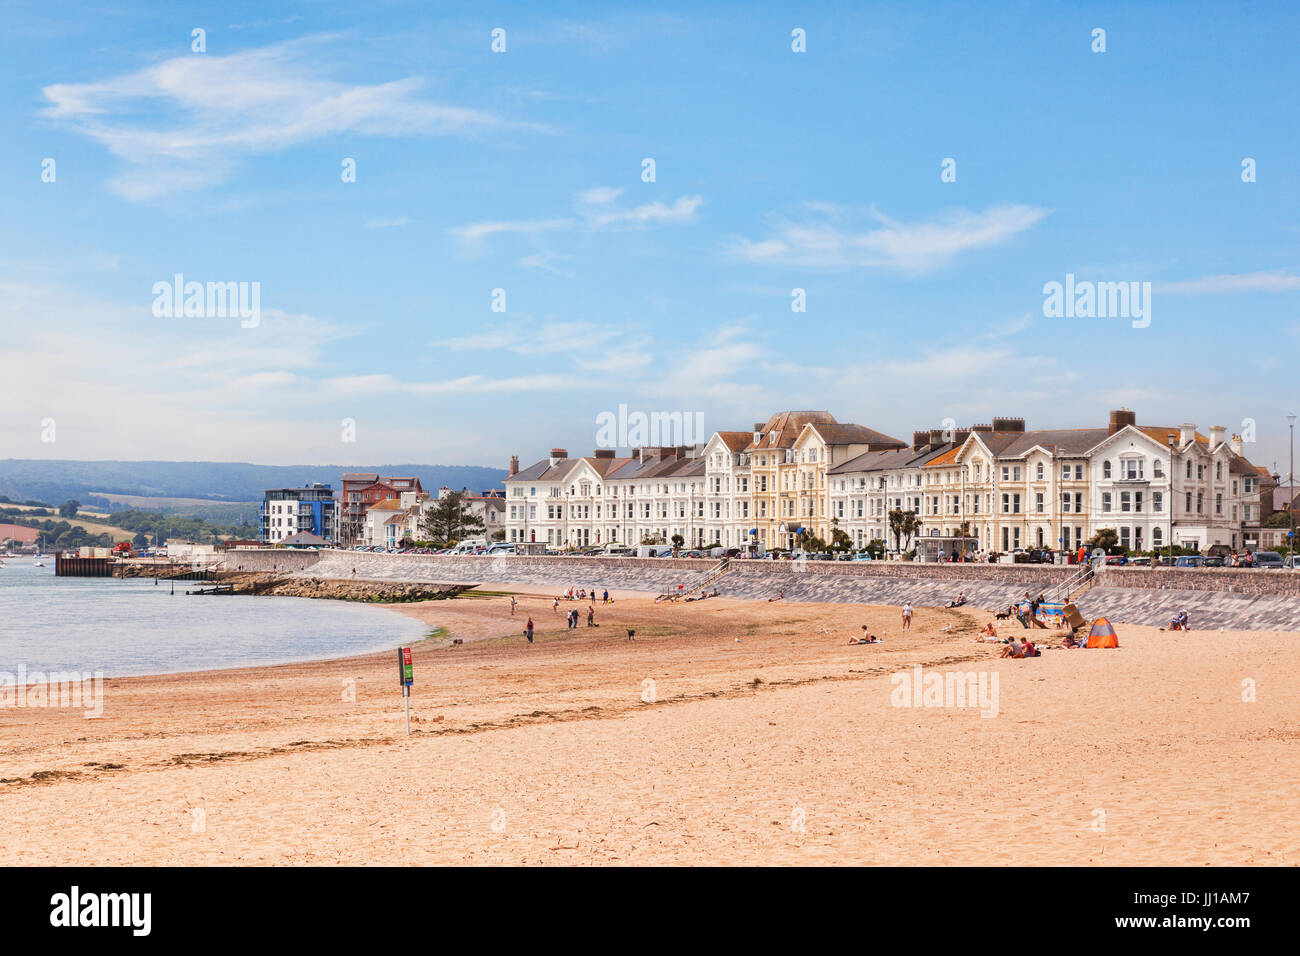 26 June 2017: Exmouth, Devon, England, UK - The beach and promenade on a sunny summer day. Stock Photo